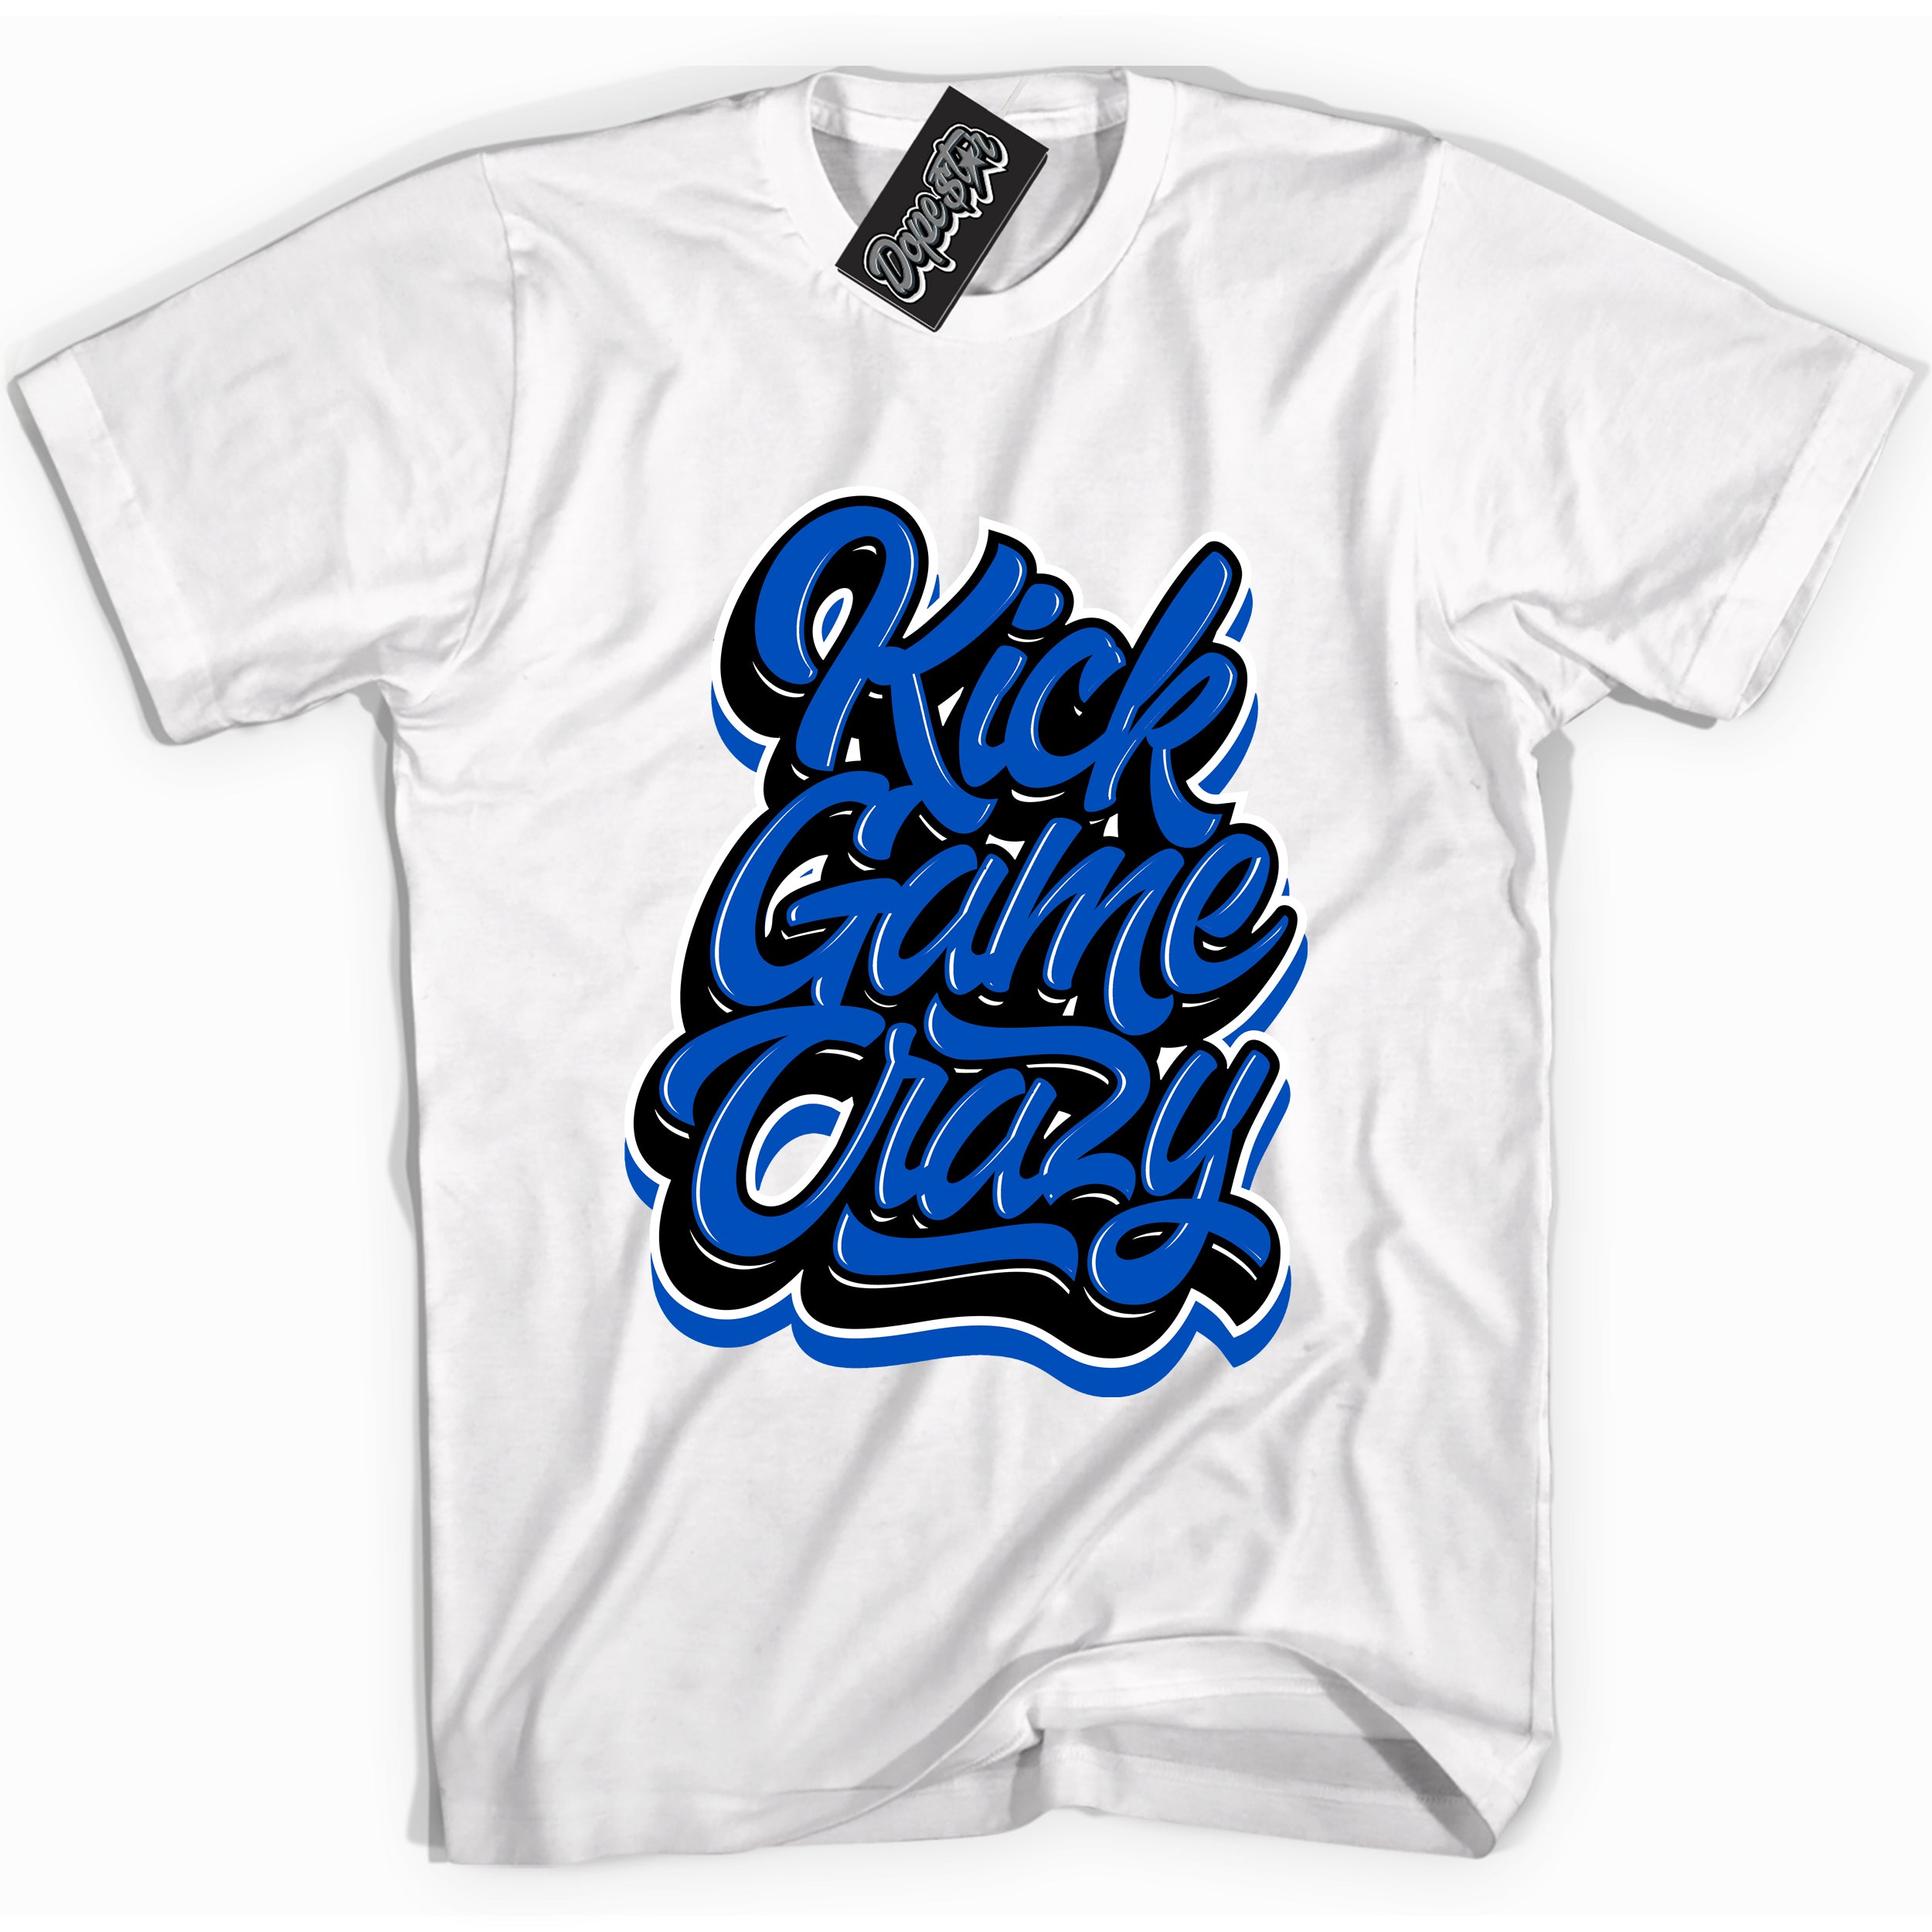 Cool White graphic tee with "Kick Game Crazy" design, that perfectly matches Royal Reimagined 1s sneakers 